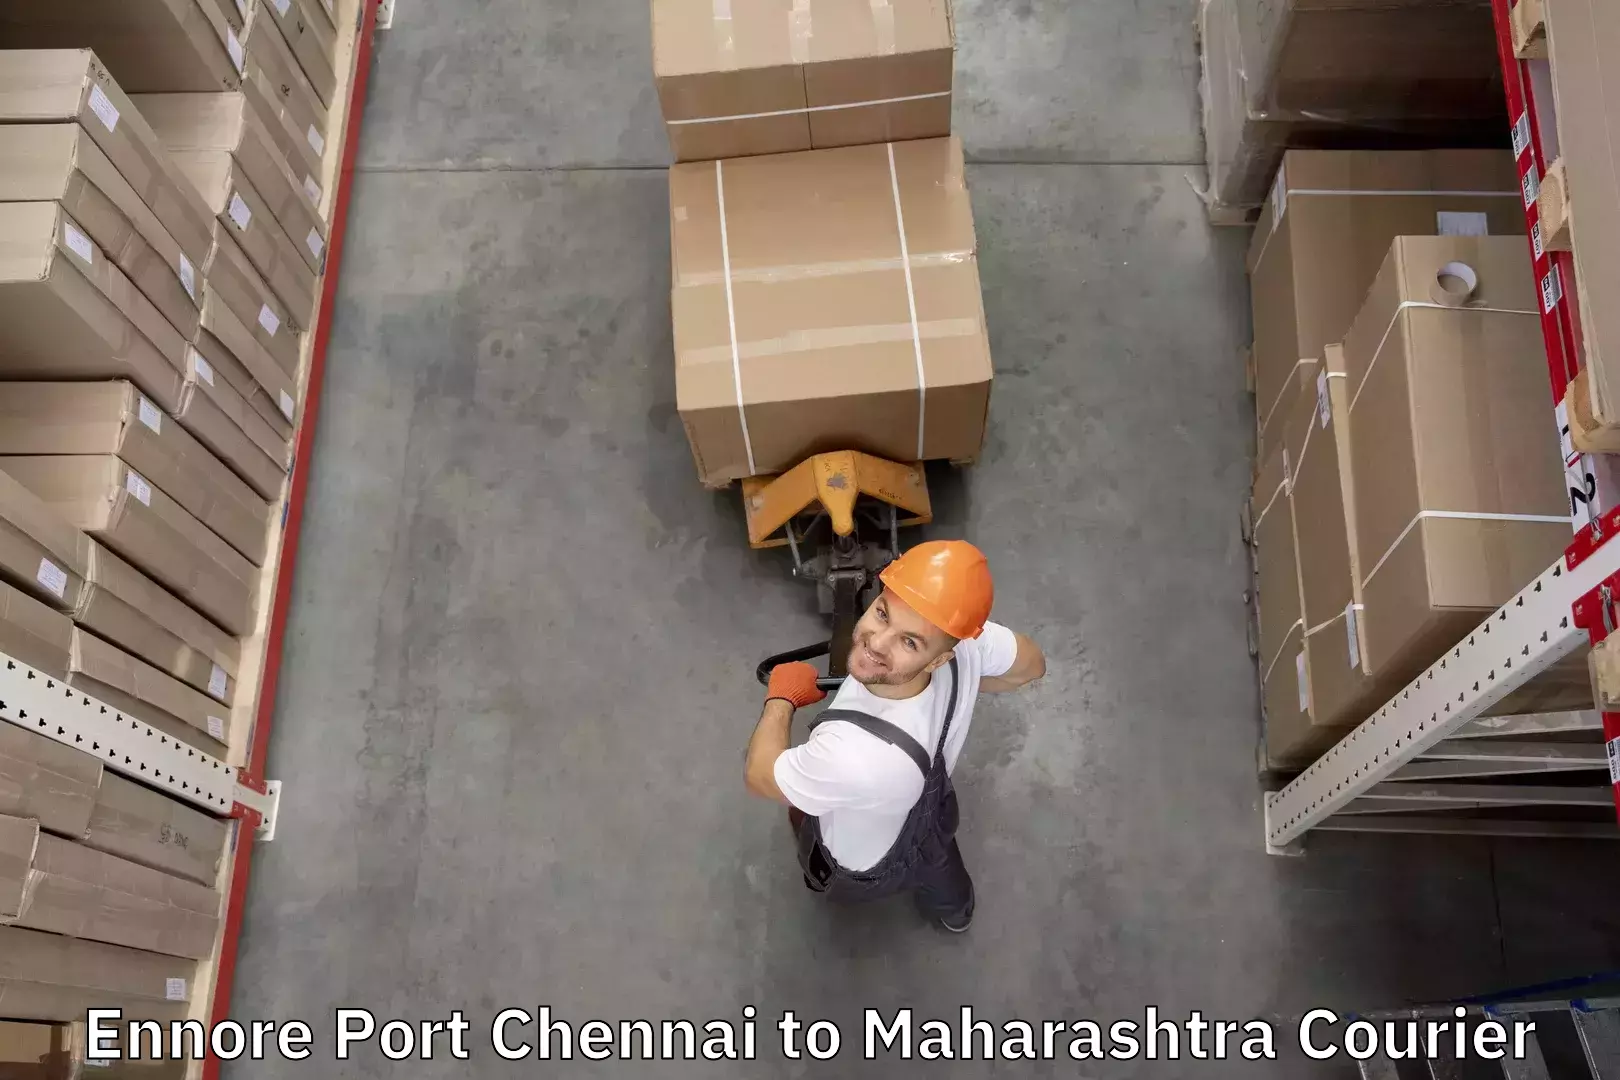 Comprehensive baggage service Ennore Port Chennai to Mul